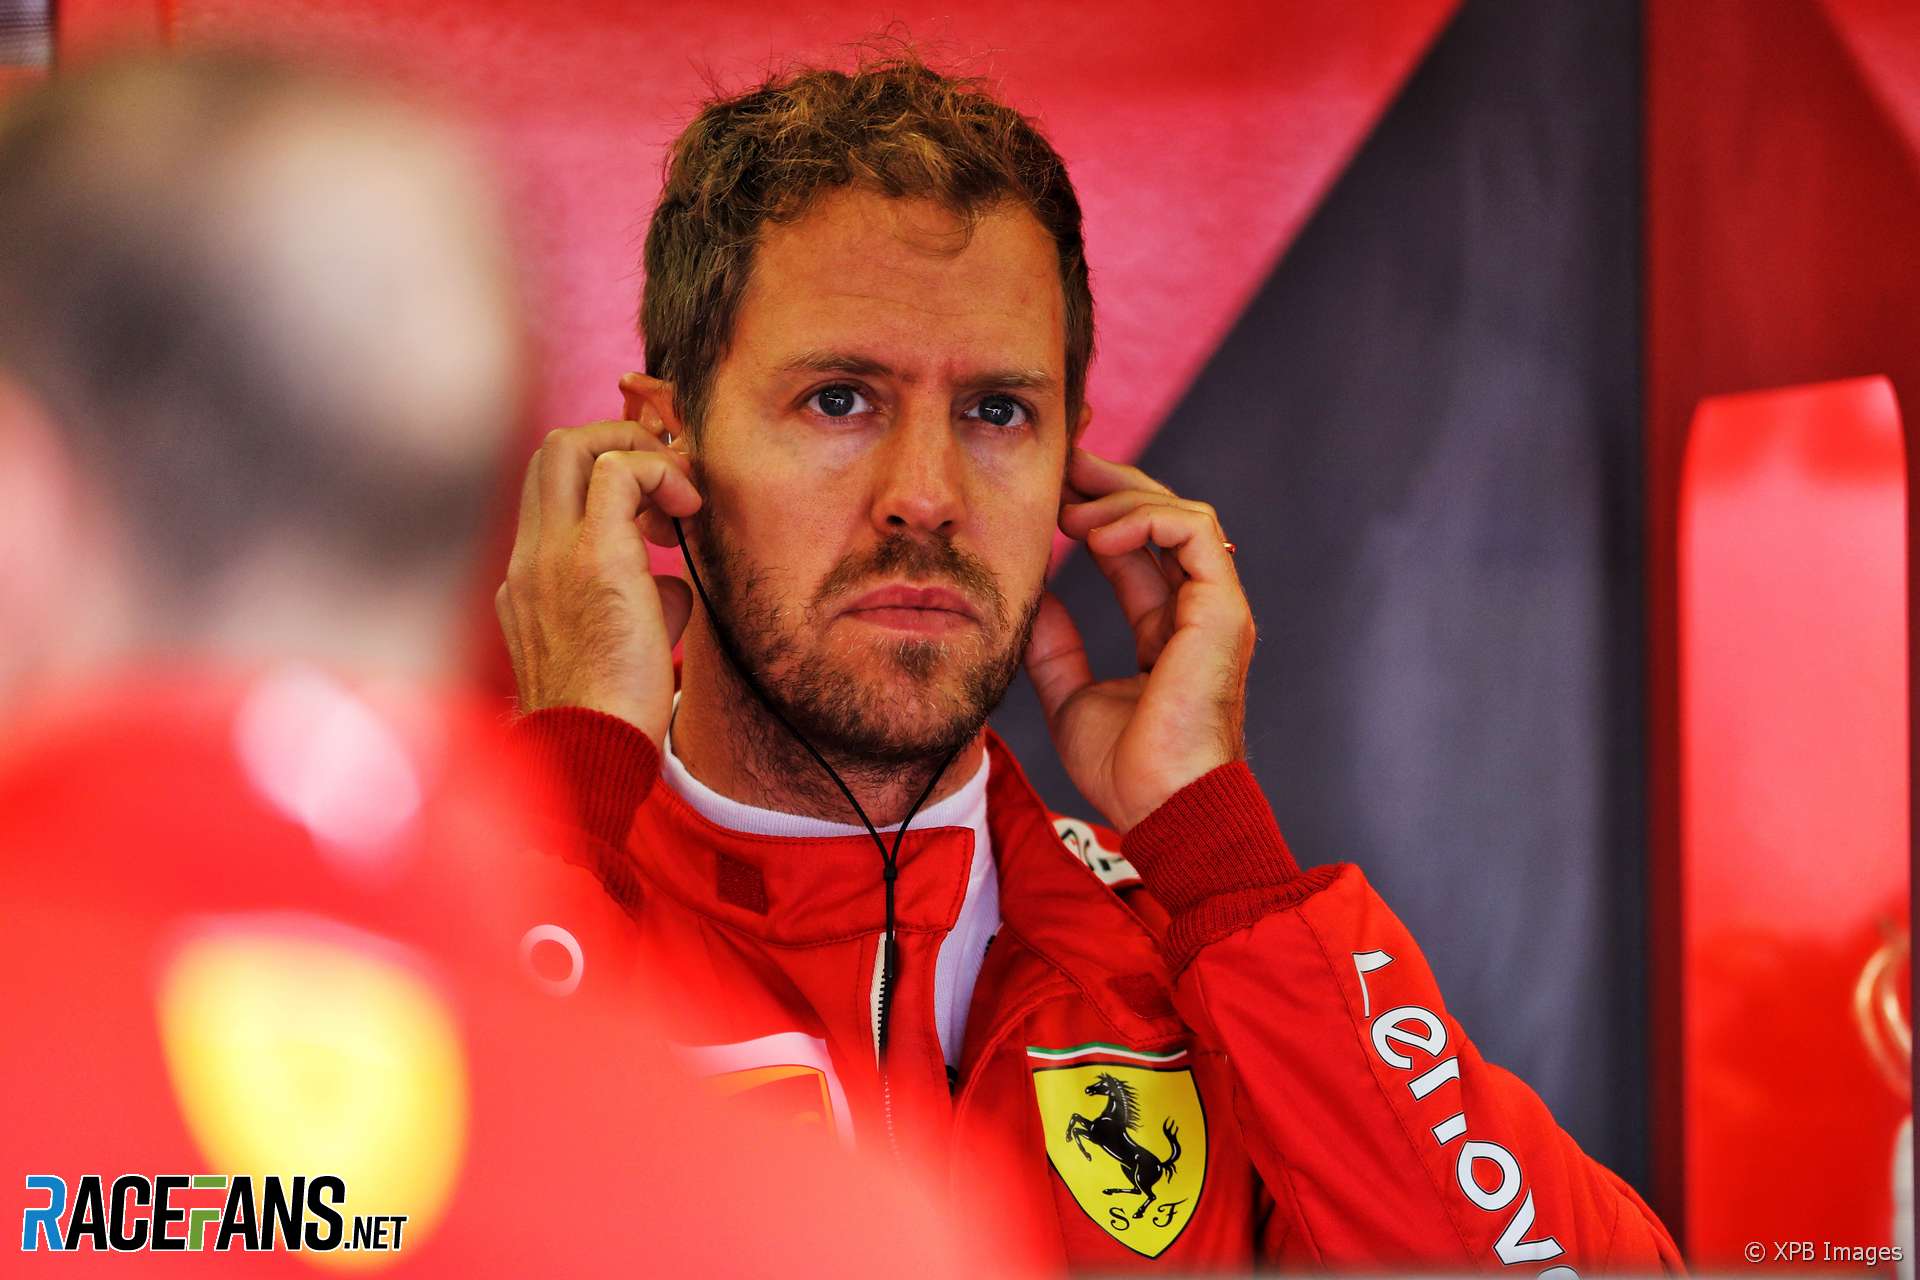 Vettel wants 2021 rules to deliver more excitement and less pace management